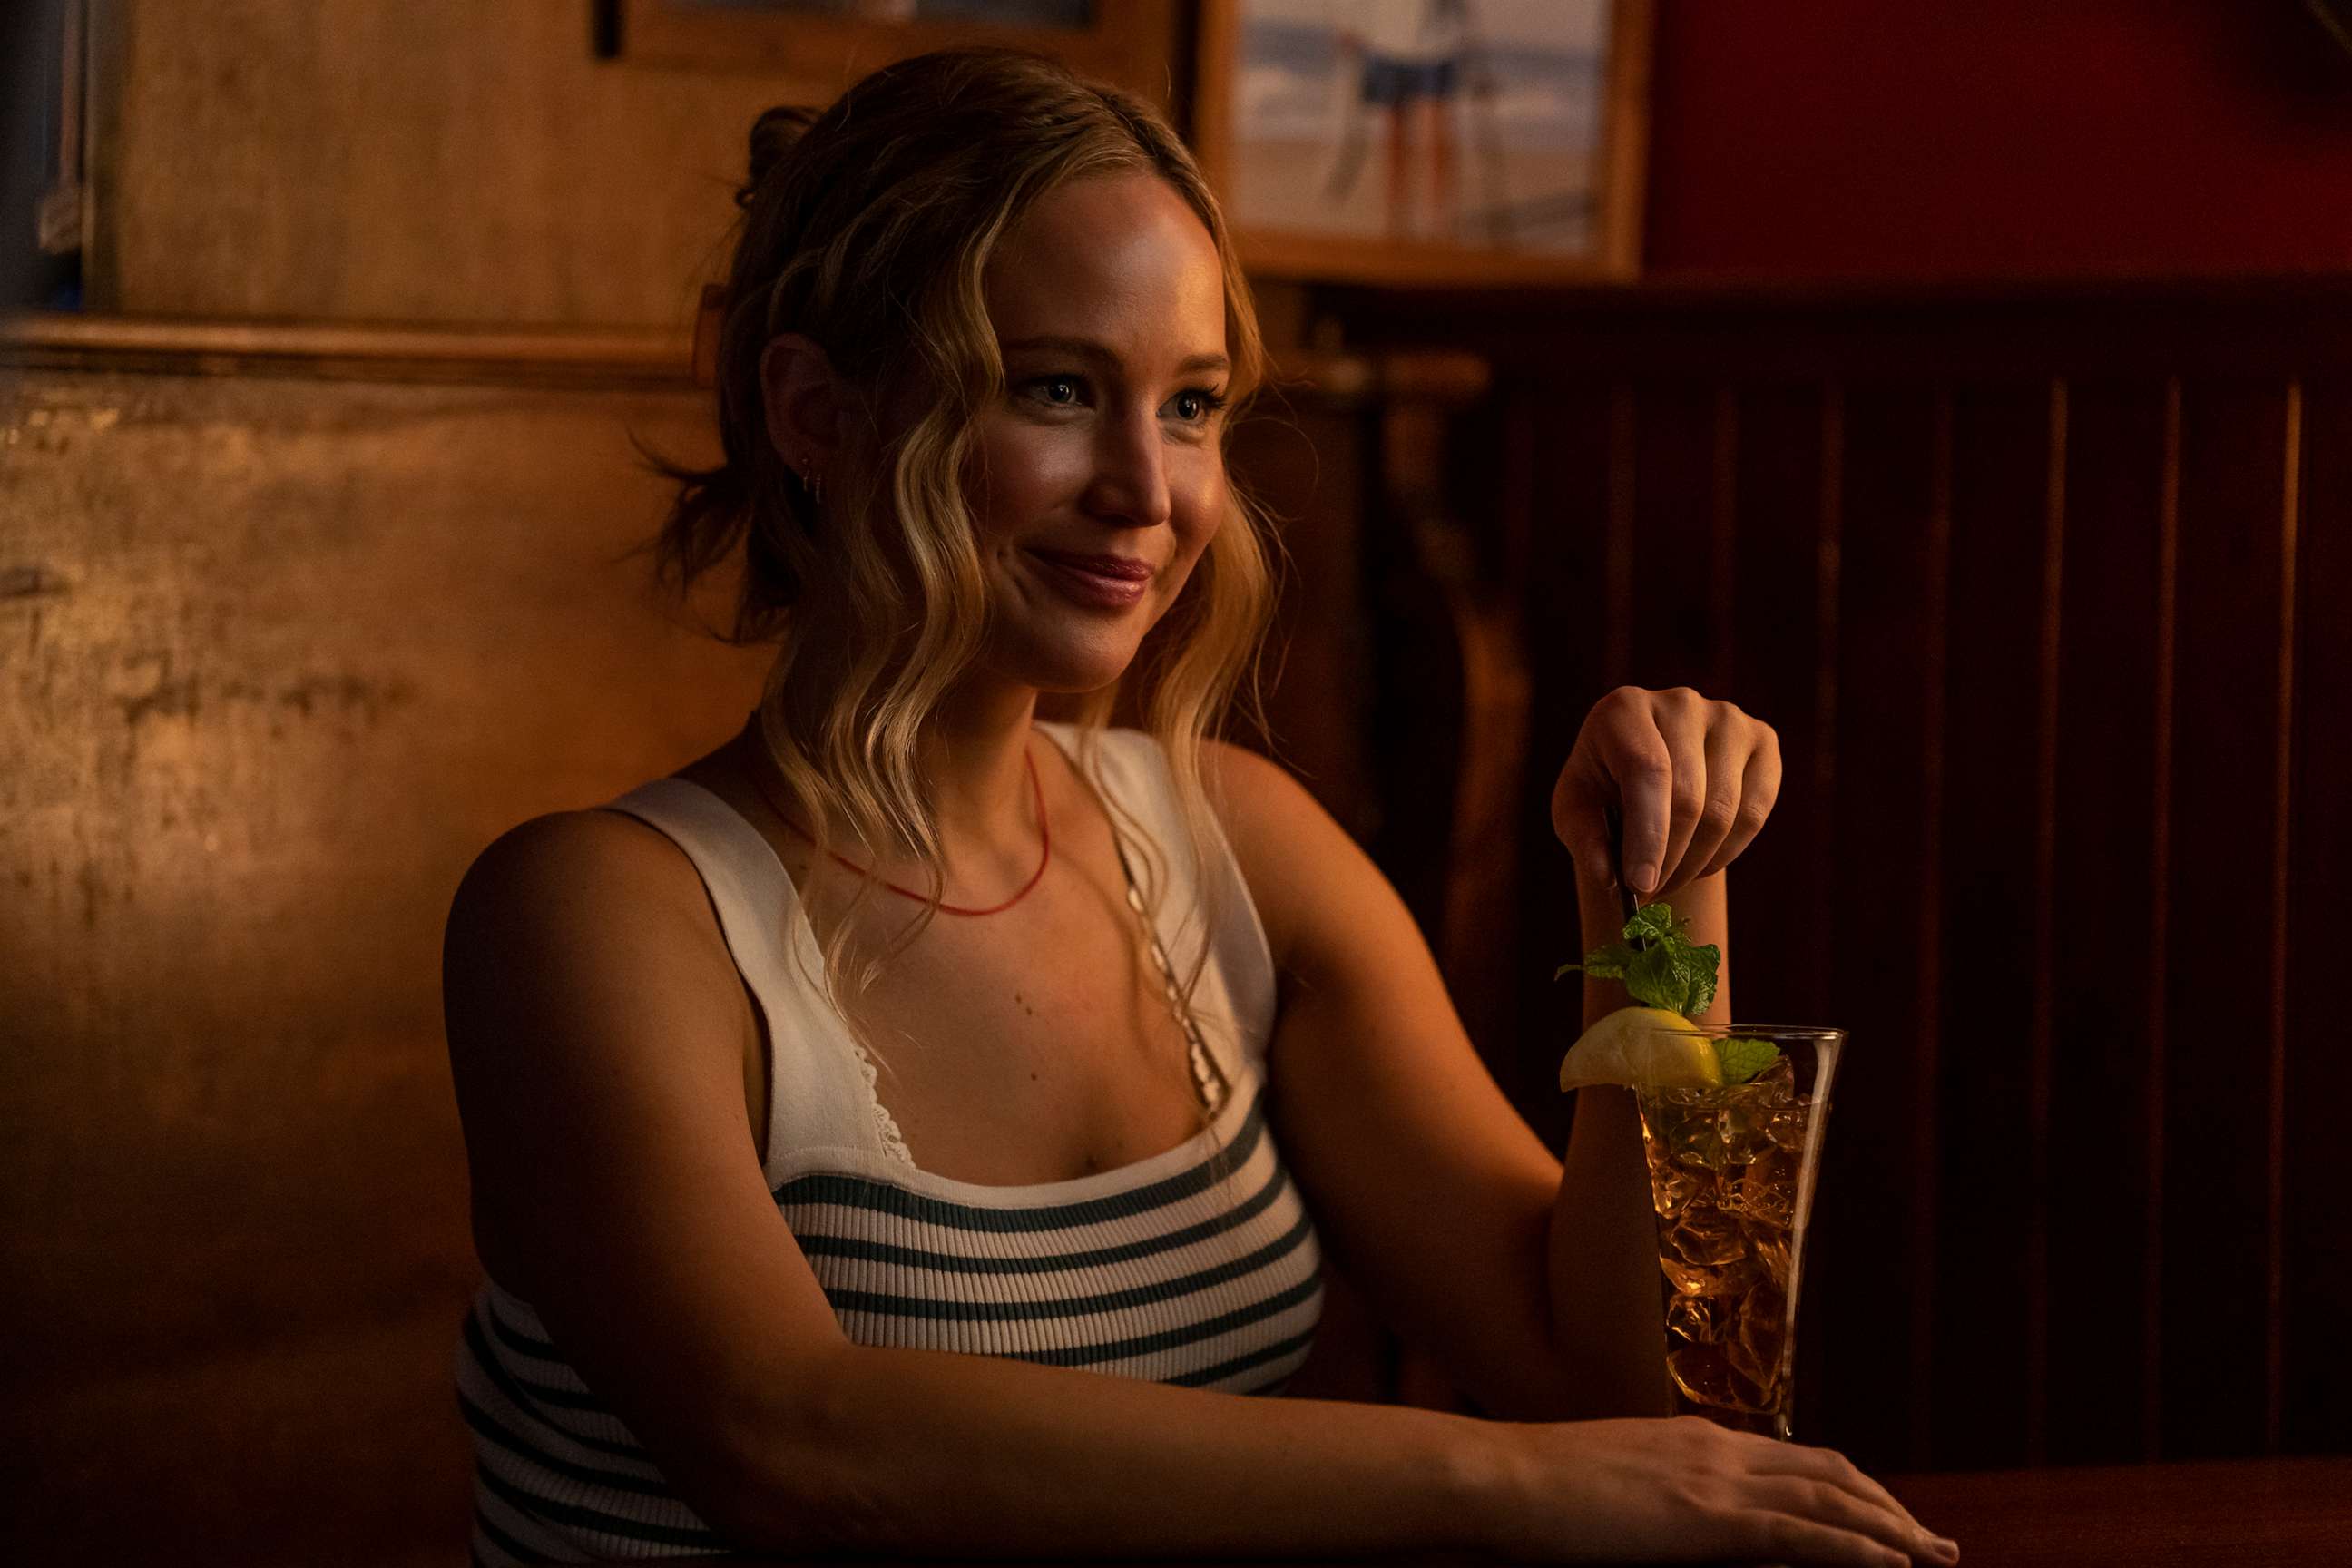 No Hard Feelings review Jennifer Lawrence is the only reason to see film  image pic